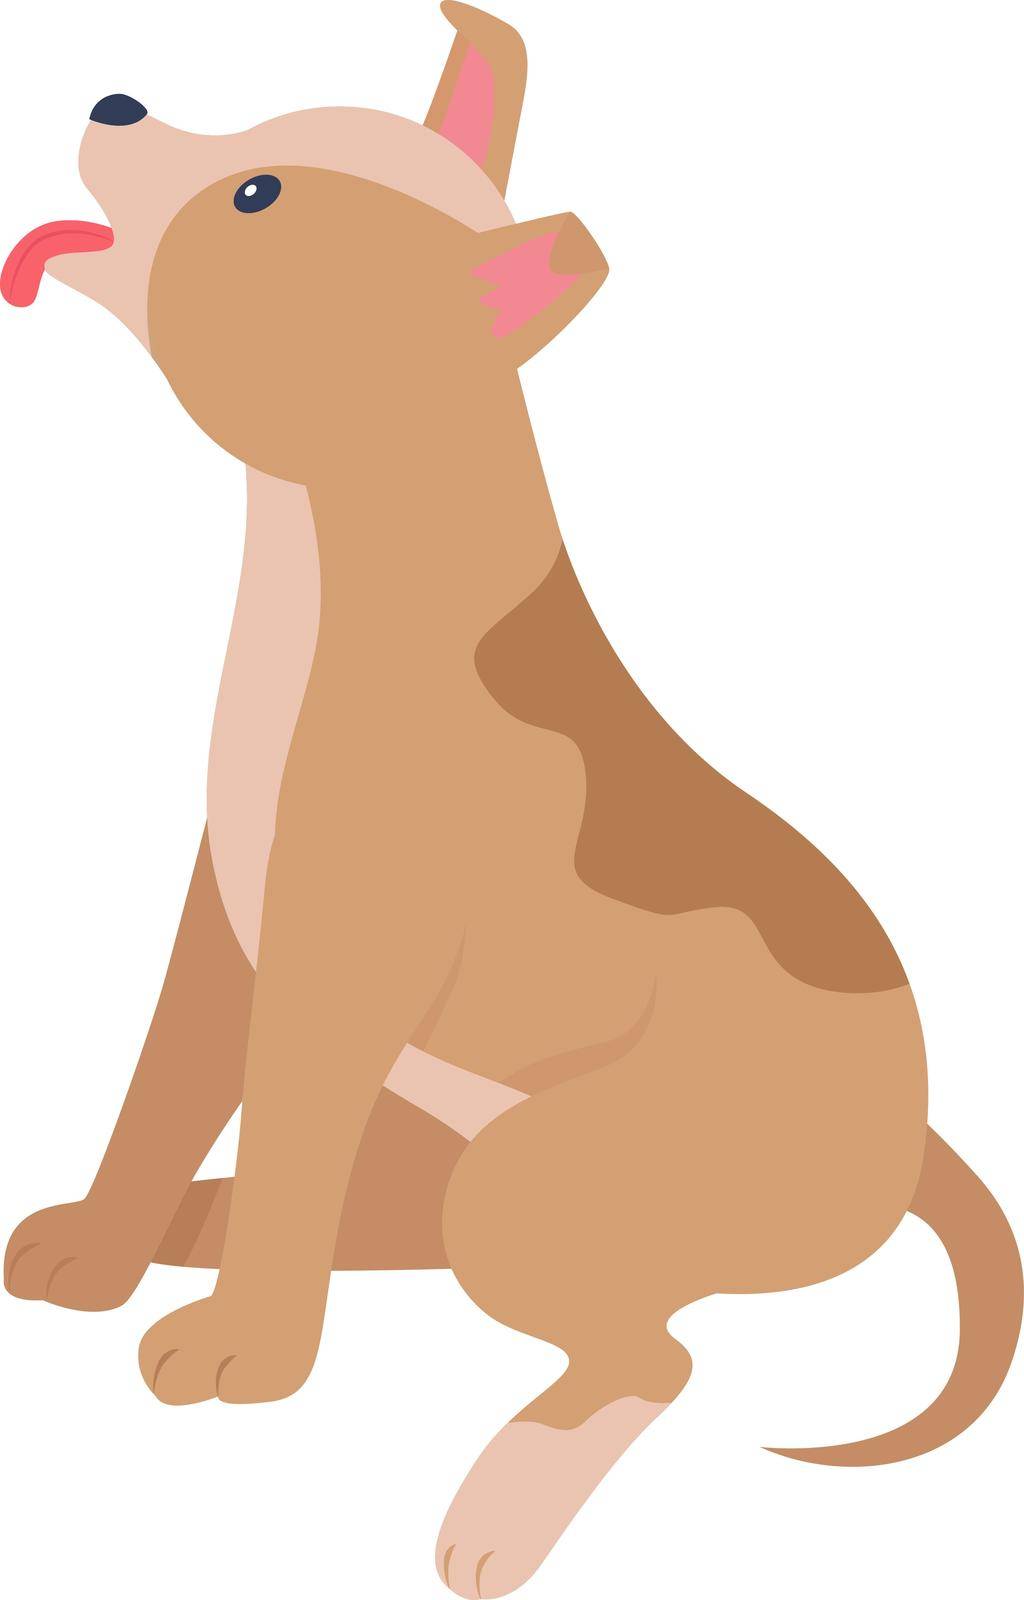 Adopt puppy from abroad semi flat color vector character by ntl